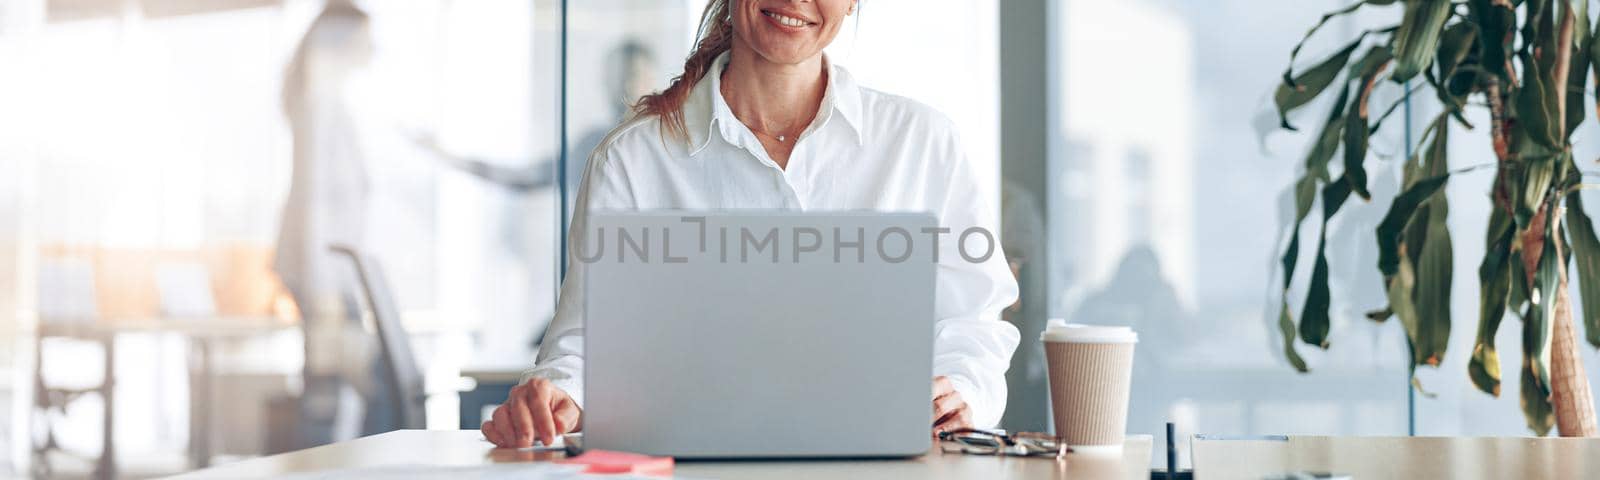 Portrait of smiling lady boss working on laptop at workplace in modern office. Blurred background